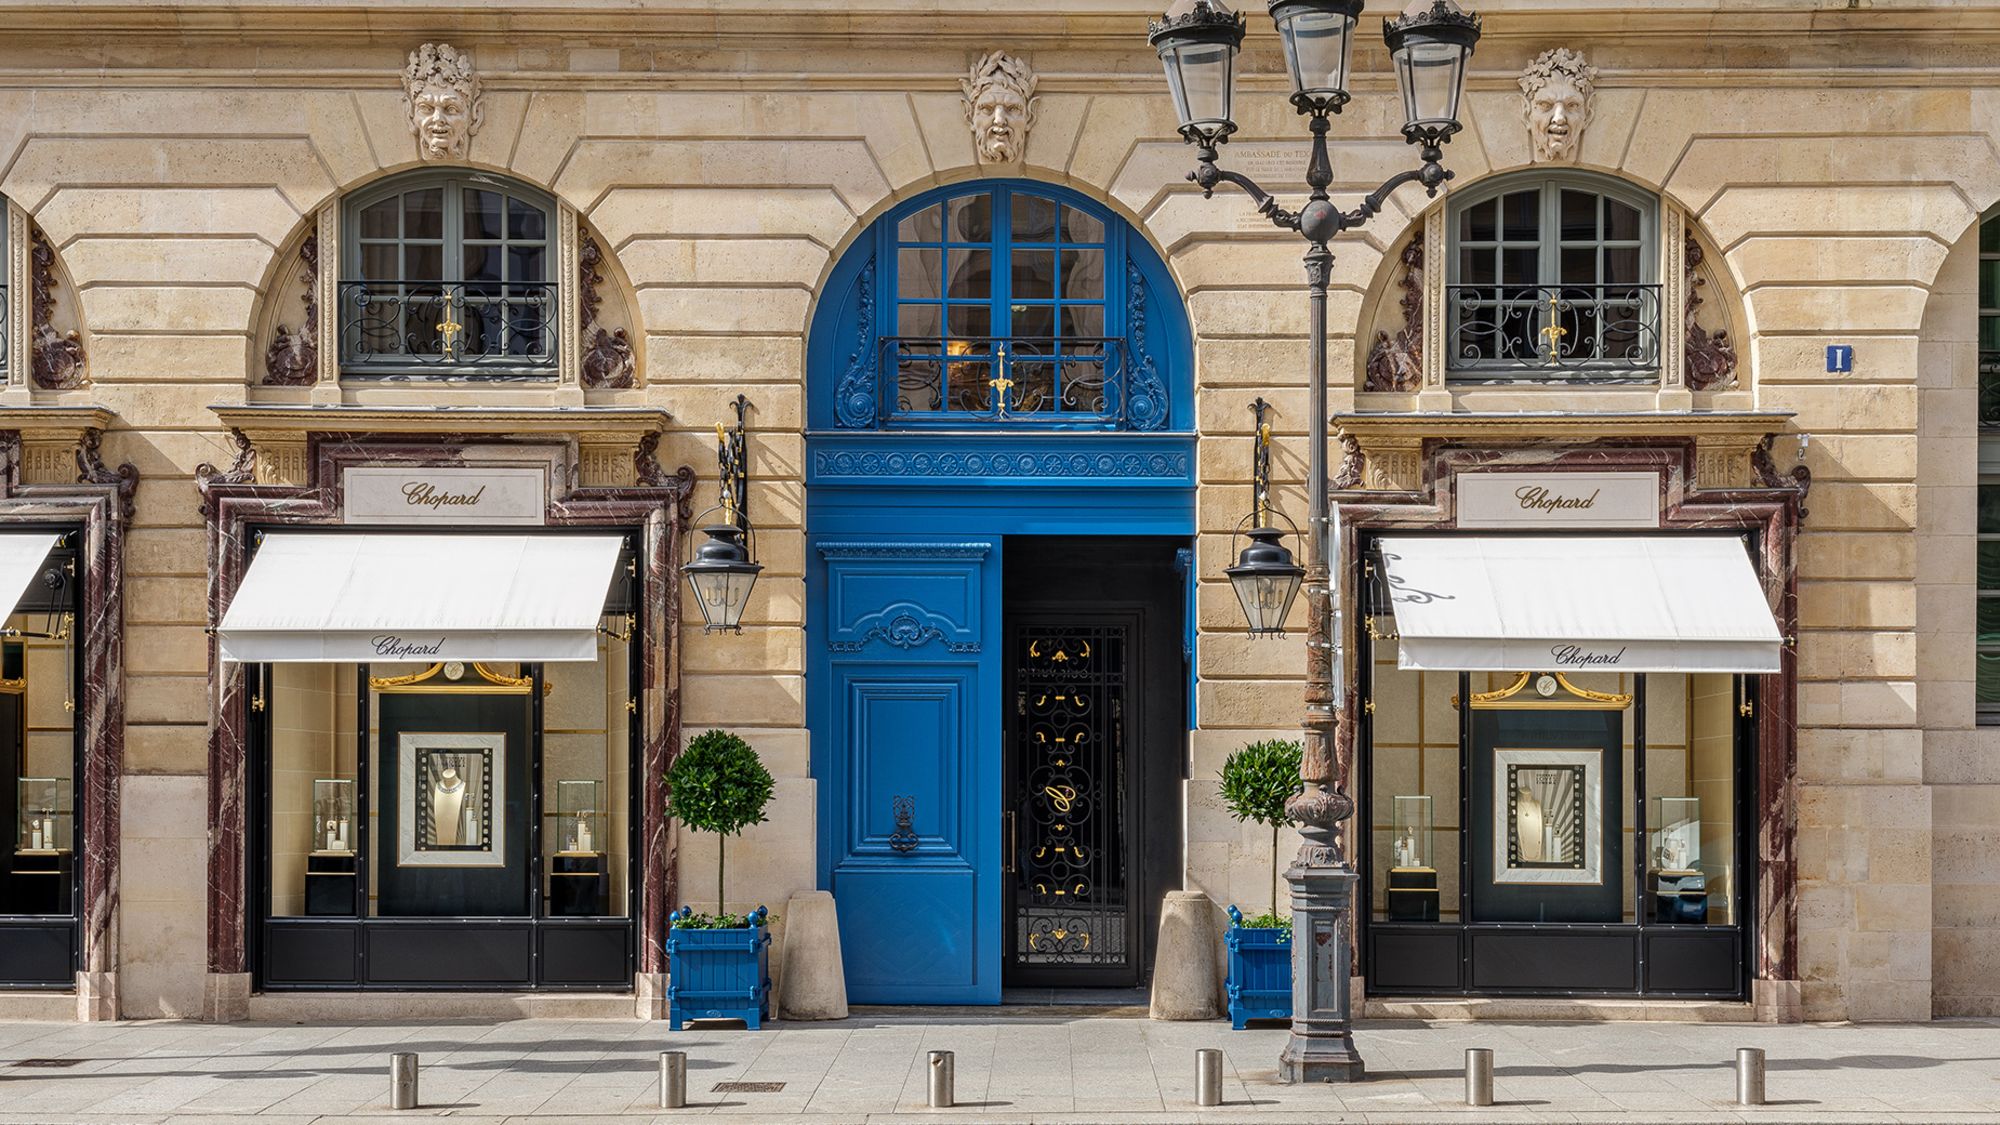 A pair of blue doors and a wrought iron gate with a cursive "C" are the only identifiers of Chopard's discreet new hotel, flanked by it's jewelry store in Paris.